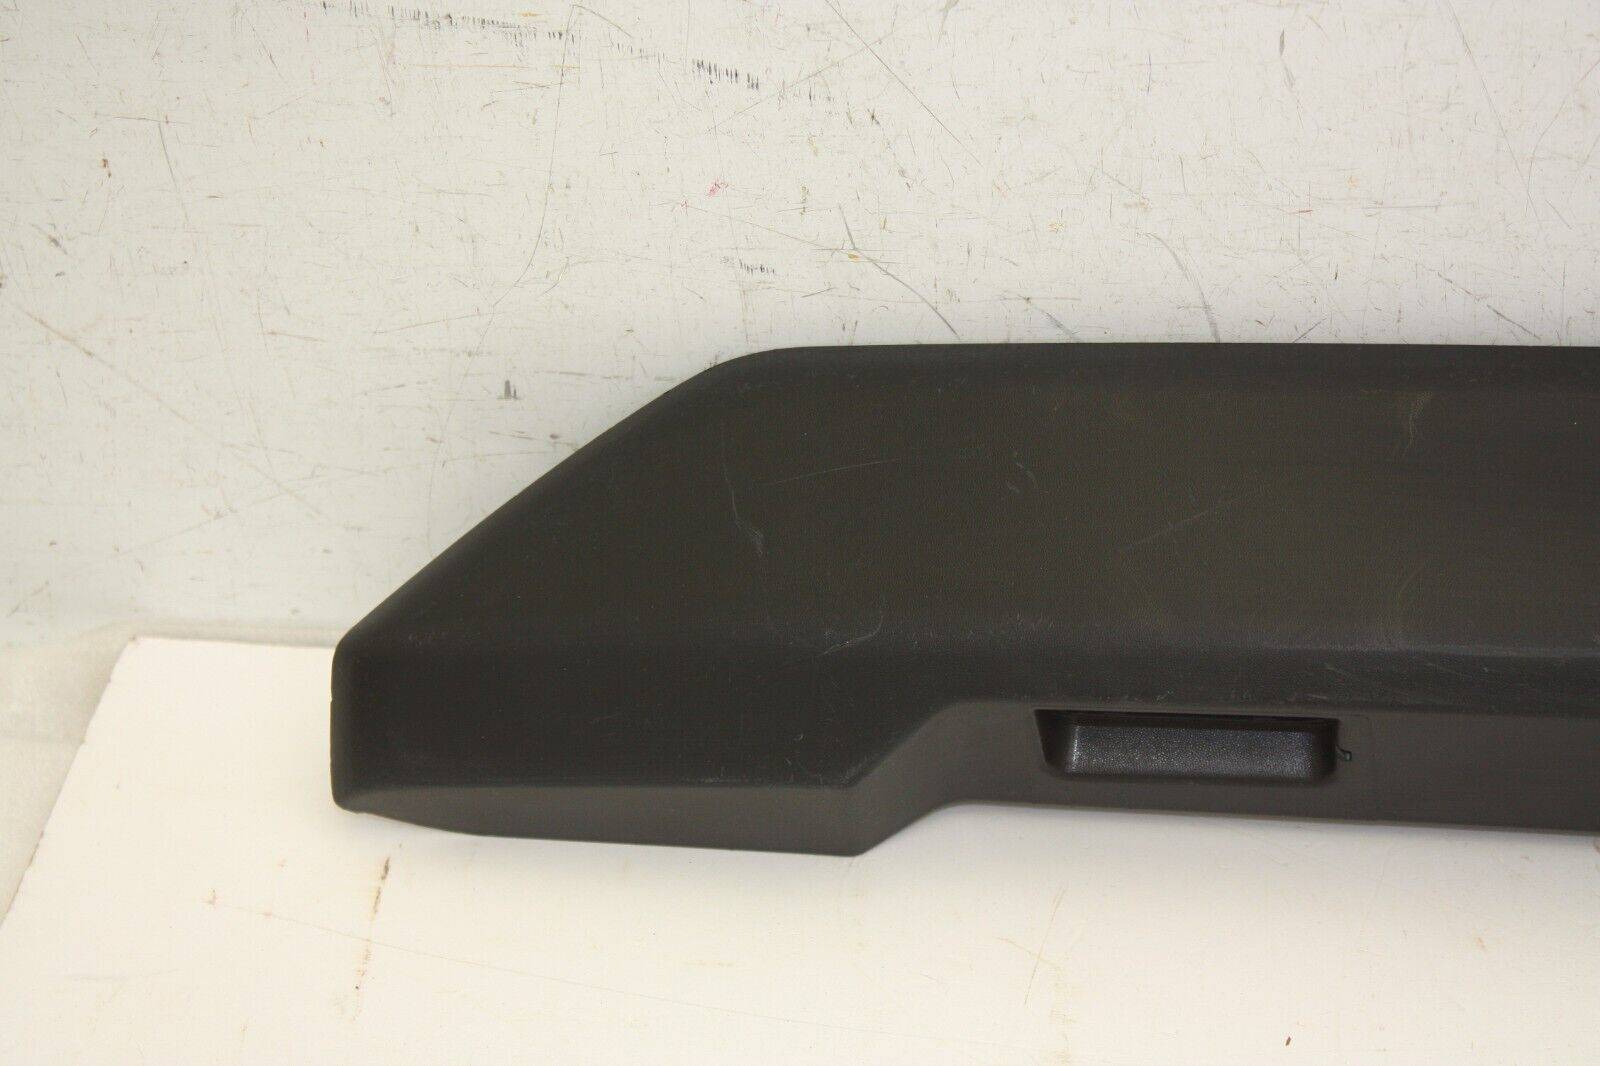 Ford-Transit-Custom-Tailgate-Lid-Cover-Recording-Bar-2018-ON-BK21-13555-AFW-176302846649-5